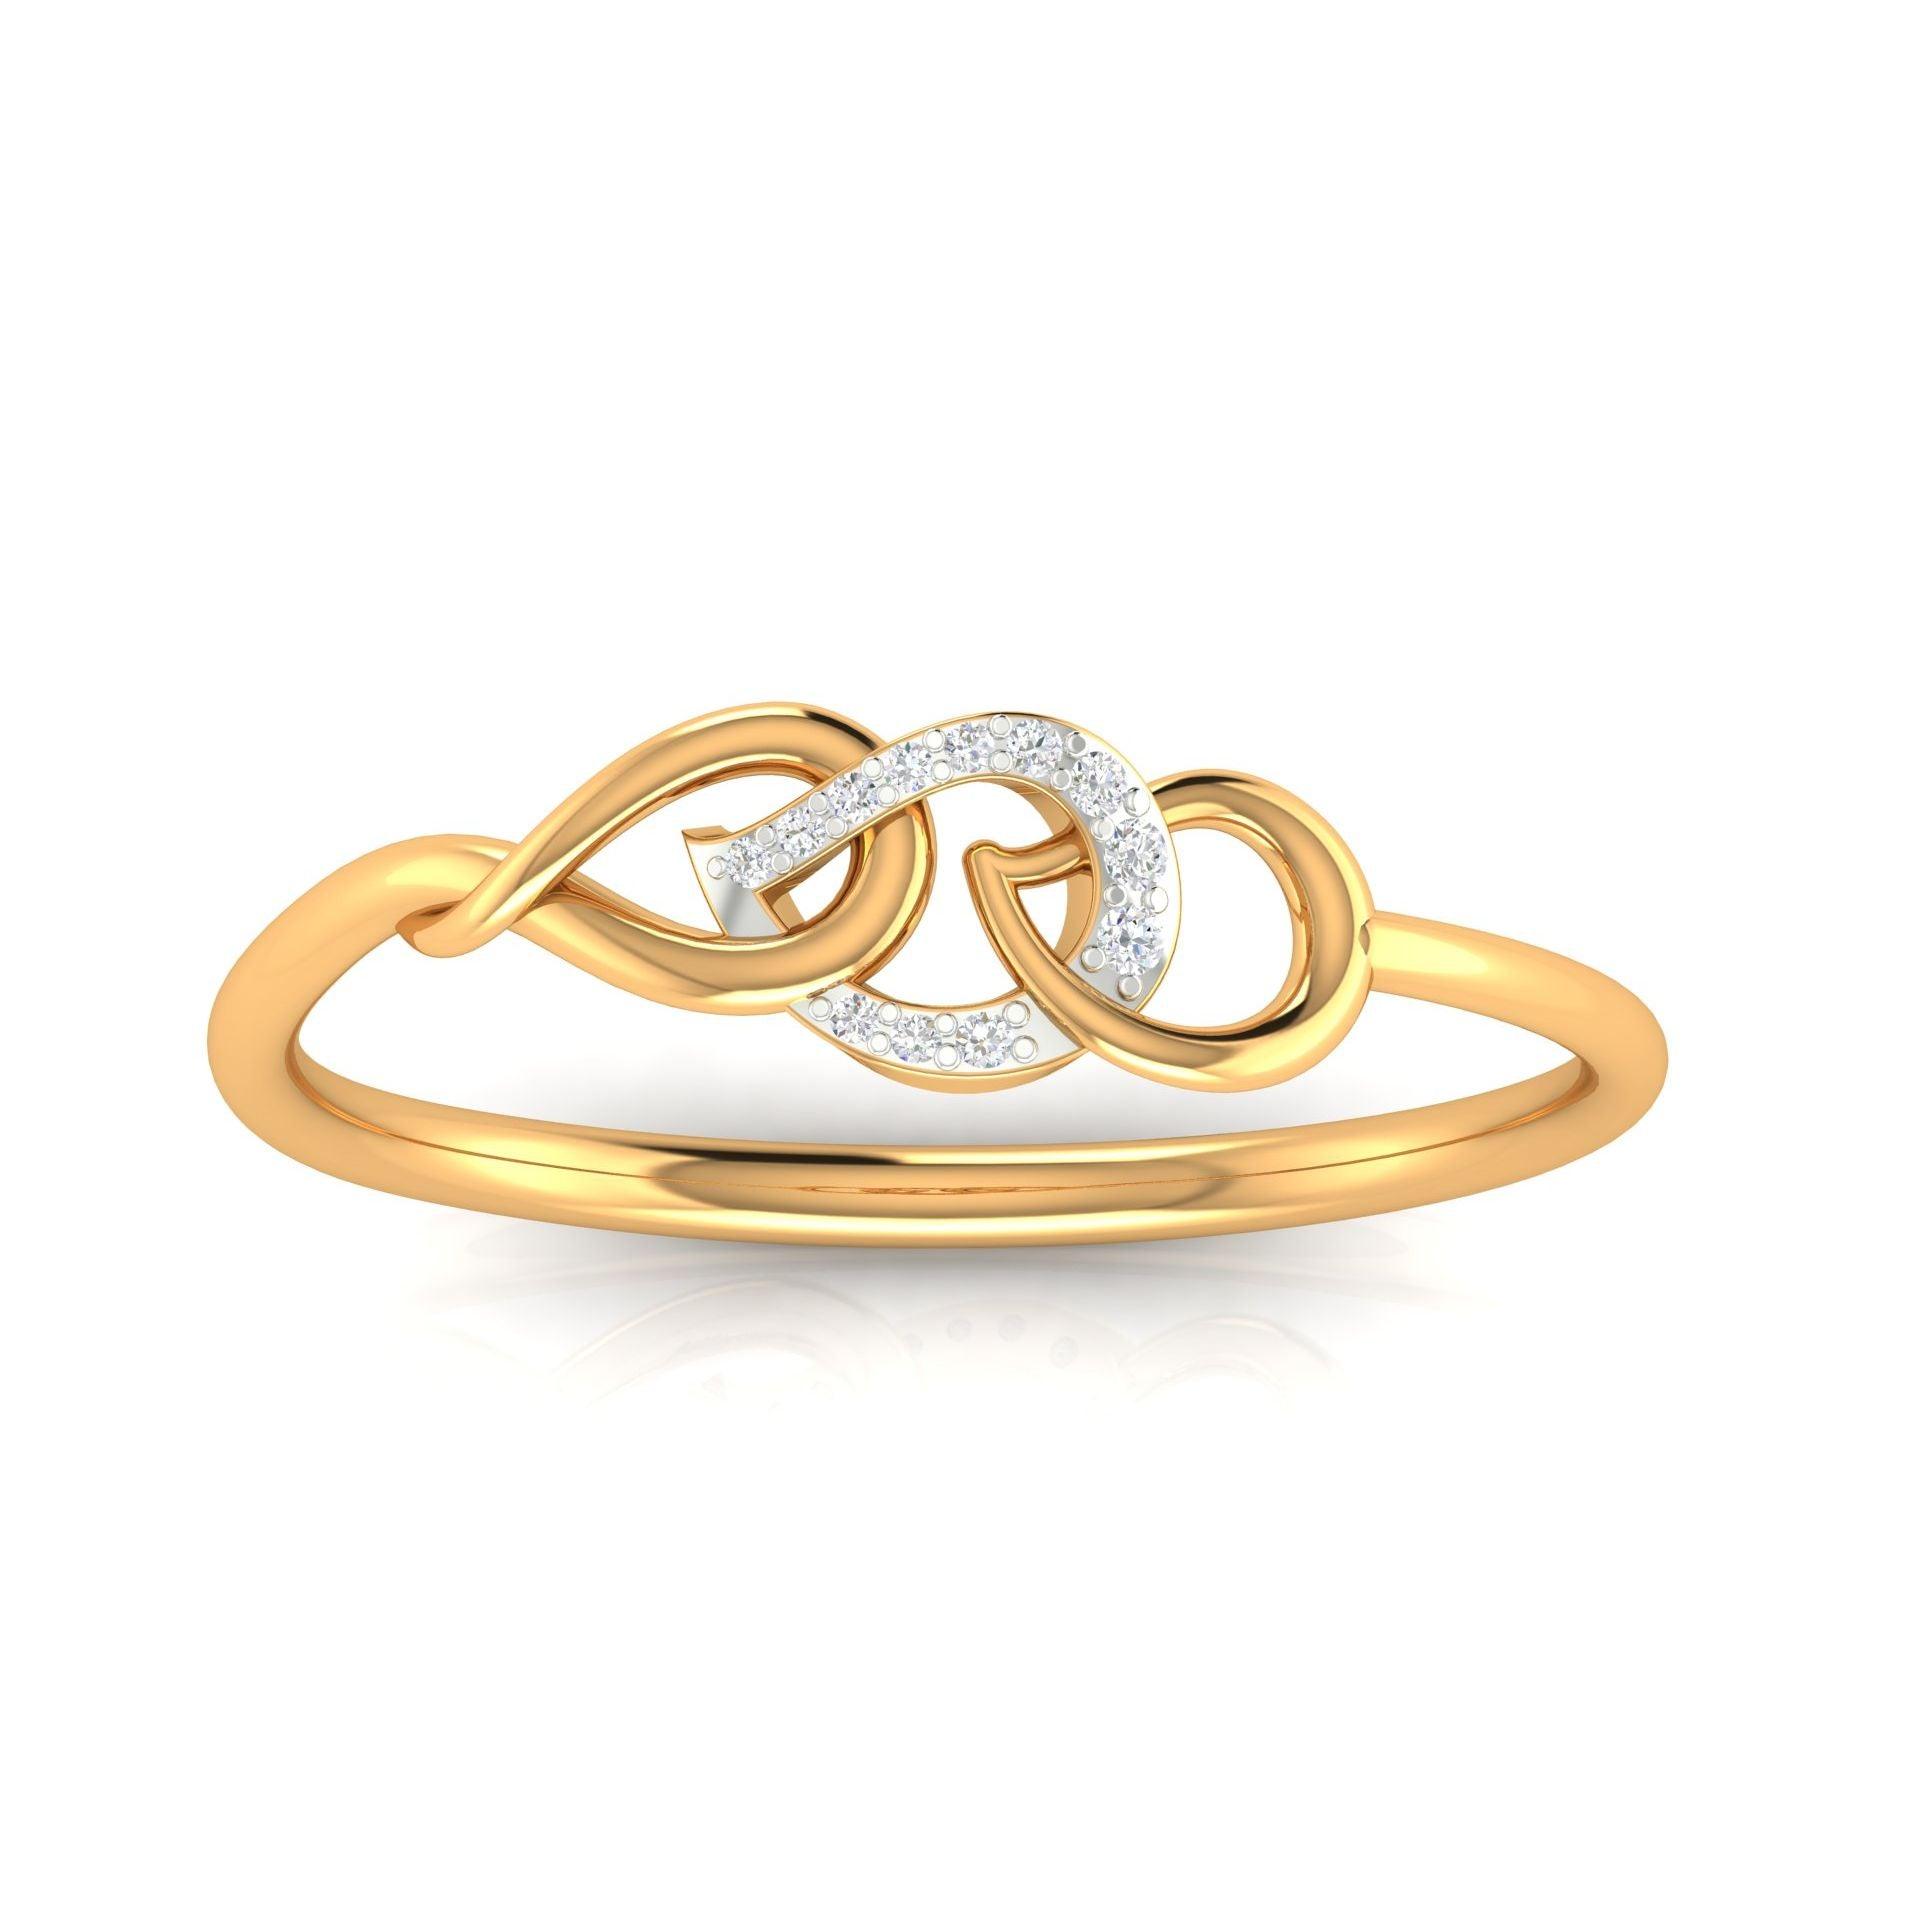 Exquisite Lightweight Couple Wedding Rings For Women Wear Resistant Party  Wedding Rings For Women G1125 From Sihuai05, $6.96 | DHgate.Com